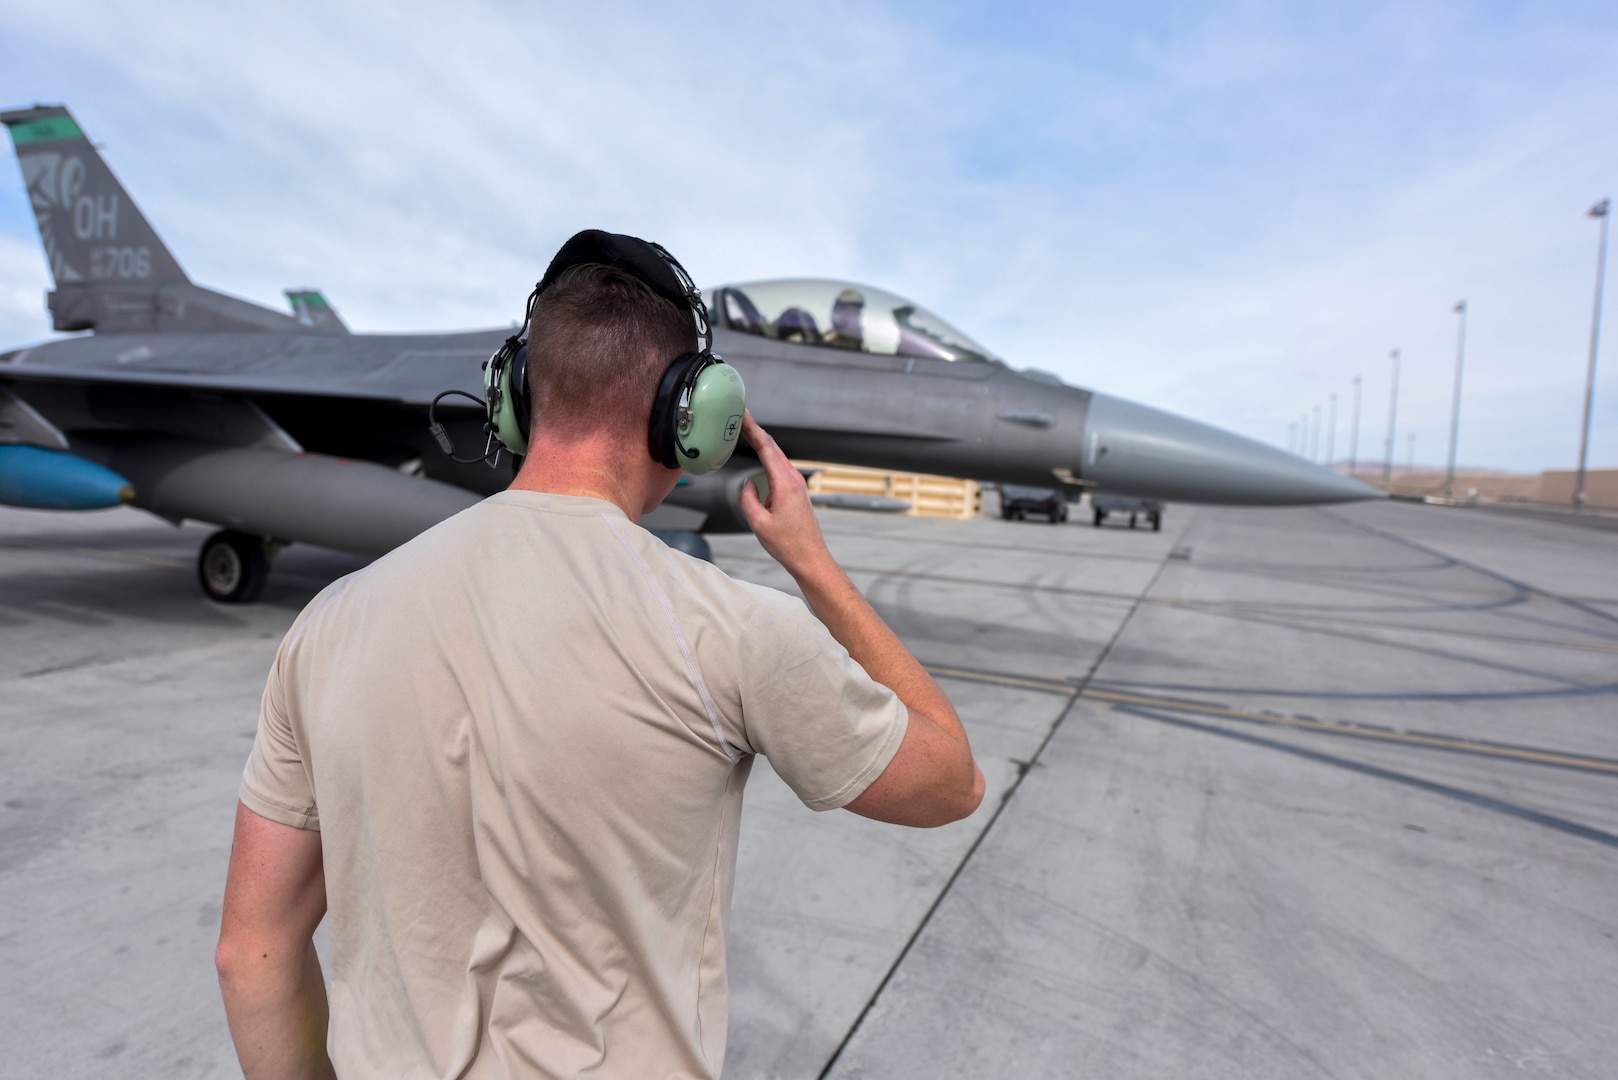 U.S. Air Force Staff Sgt. Brayden Bobp, a crew chief assigned to the Ohio National Guard’s 180th Fighter Wing, salutes a 180FW pilot at Nellis Air Force Base, Nevada, during exercise Green Flag-West, Feb. 15, 2020. The joint training exercise improves interoperability between aircraft while supporting ground troops by allowing U.S. military branches and other NATO and allied nations to work together.